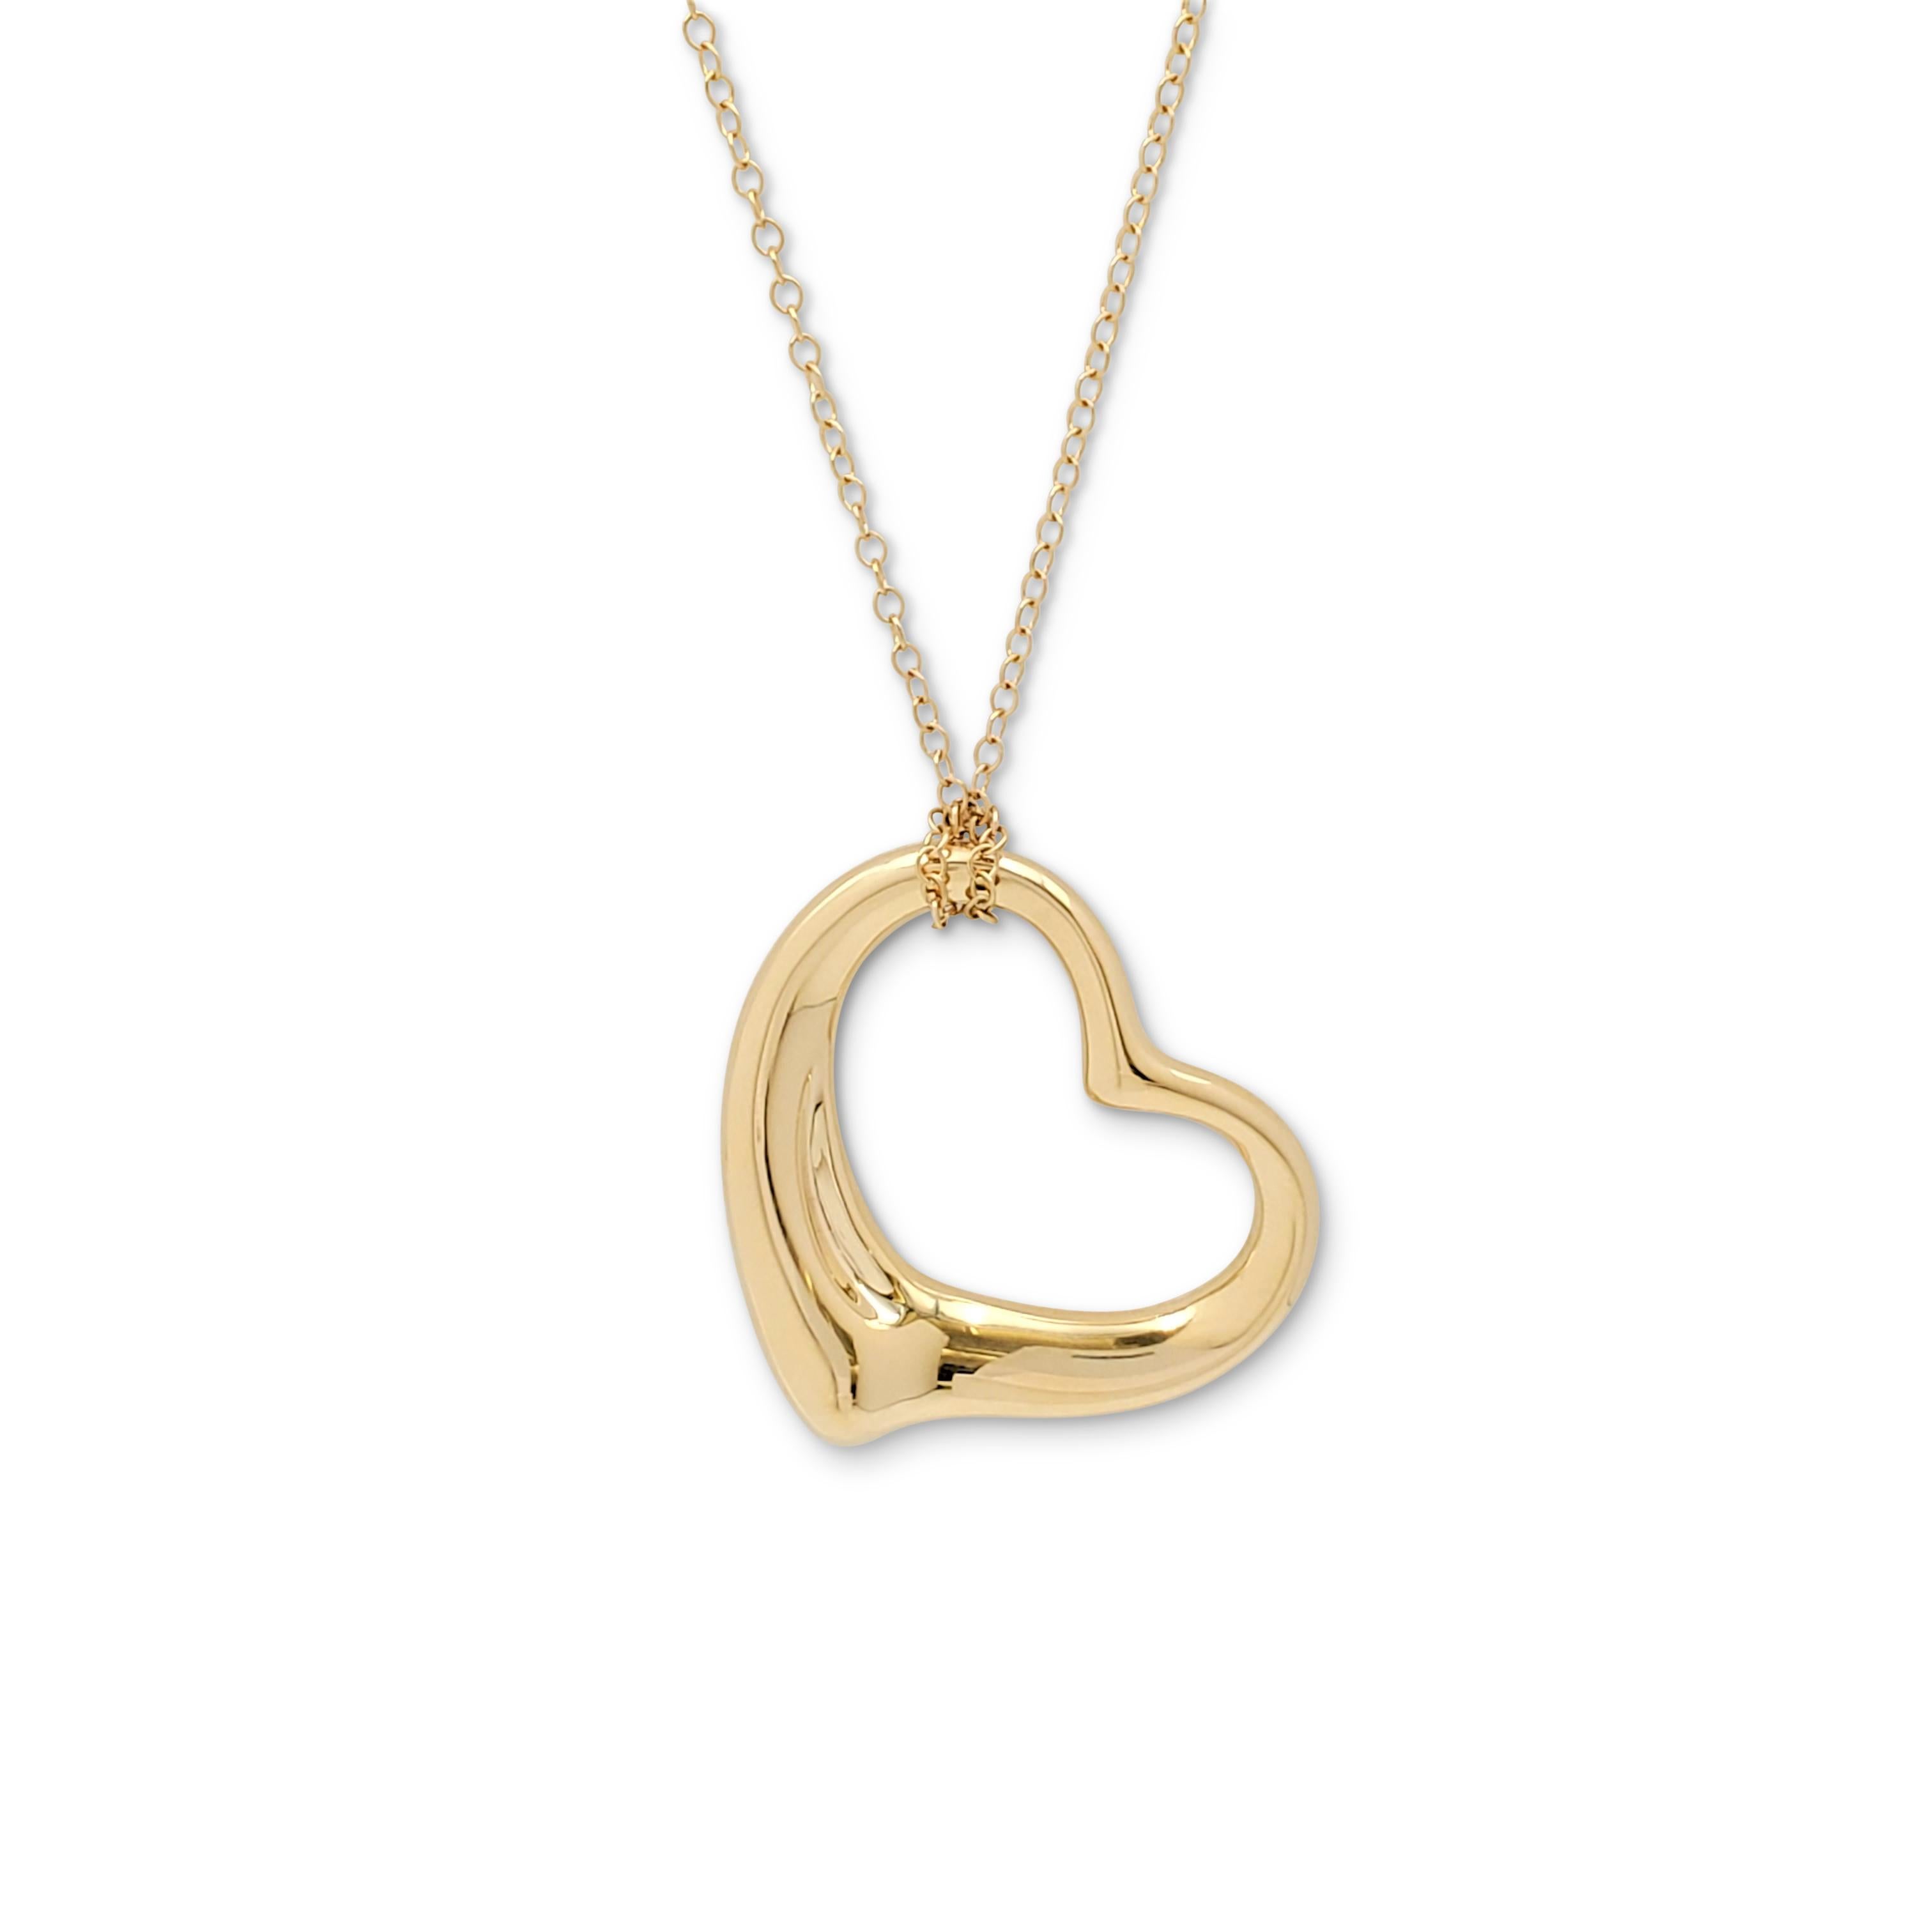 Authentic Elsa Peretti for Tiffany & Co. 'Open Heart' pendant crafted in 18 karat yellow gold. The pendant measures 35 x 35mm and hangs from an original 18 karat yellow gold chain which measures 30 inches in length. Signed Tiffany & Co., Elsa